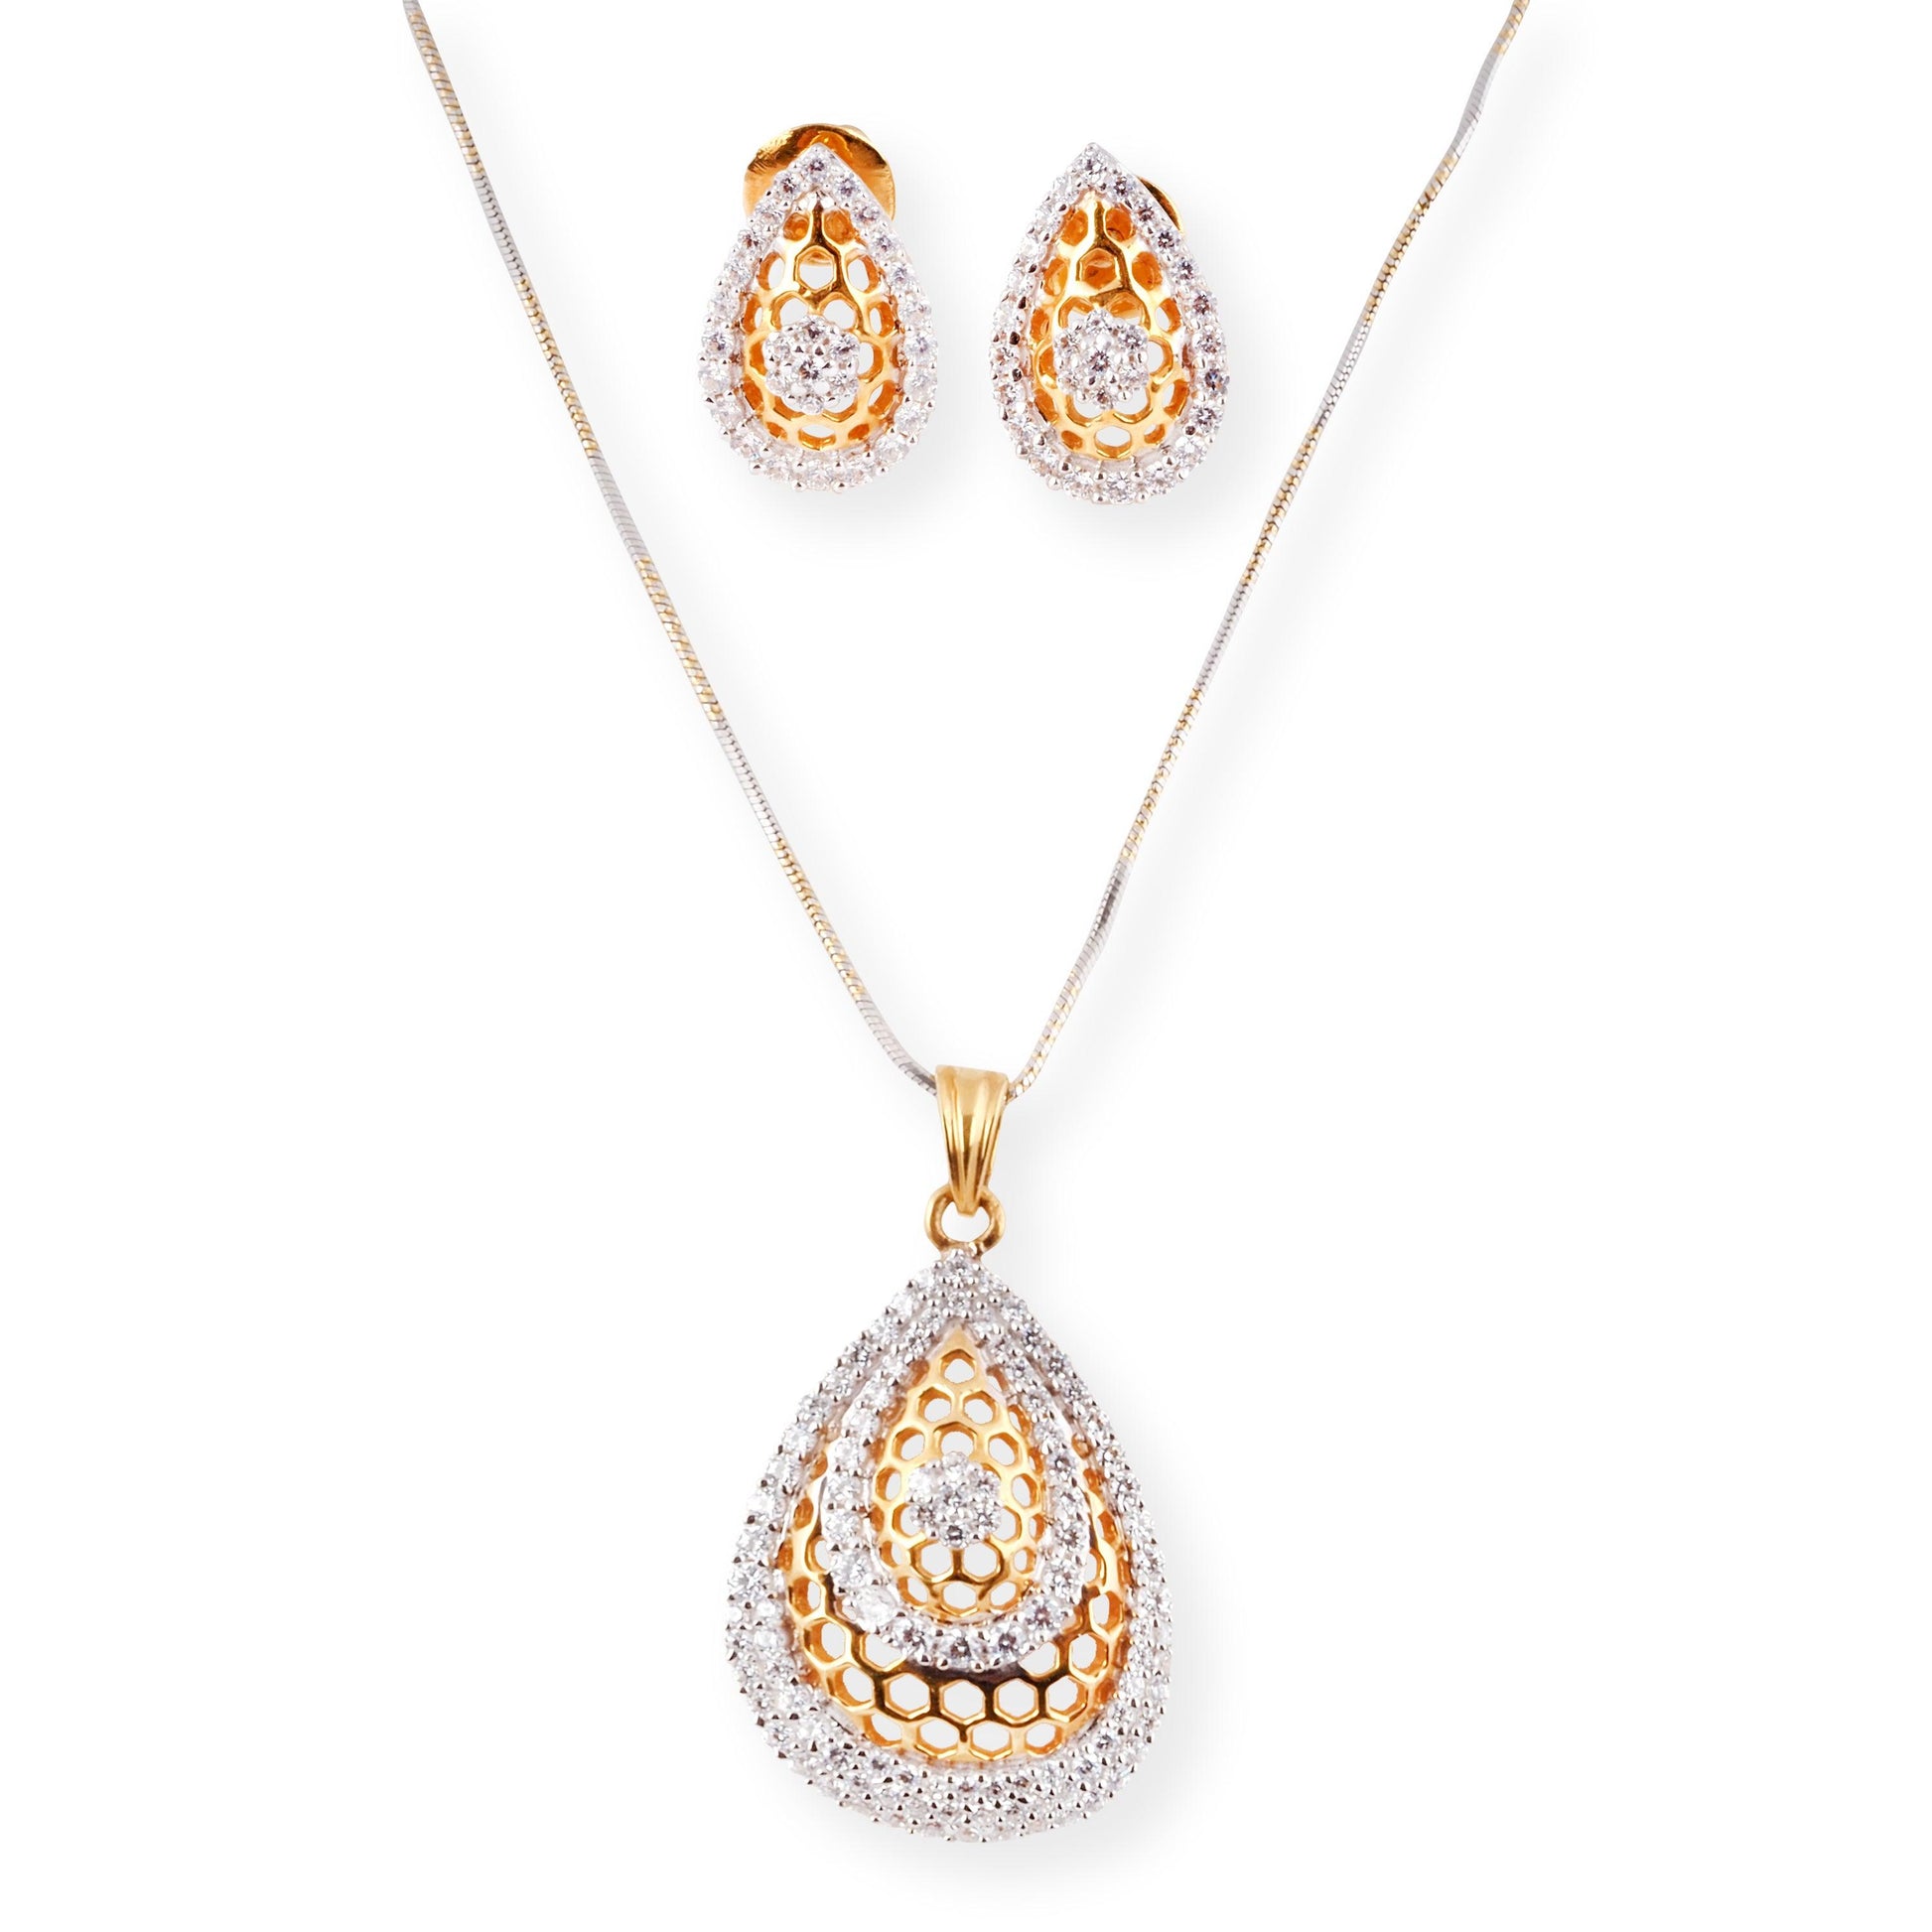 22ct Gold Pendant Set with White Cubic Zirconia Stones (Pendant + Chain + Stud Earrings)-15064 - Minar Jewellers